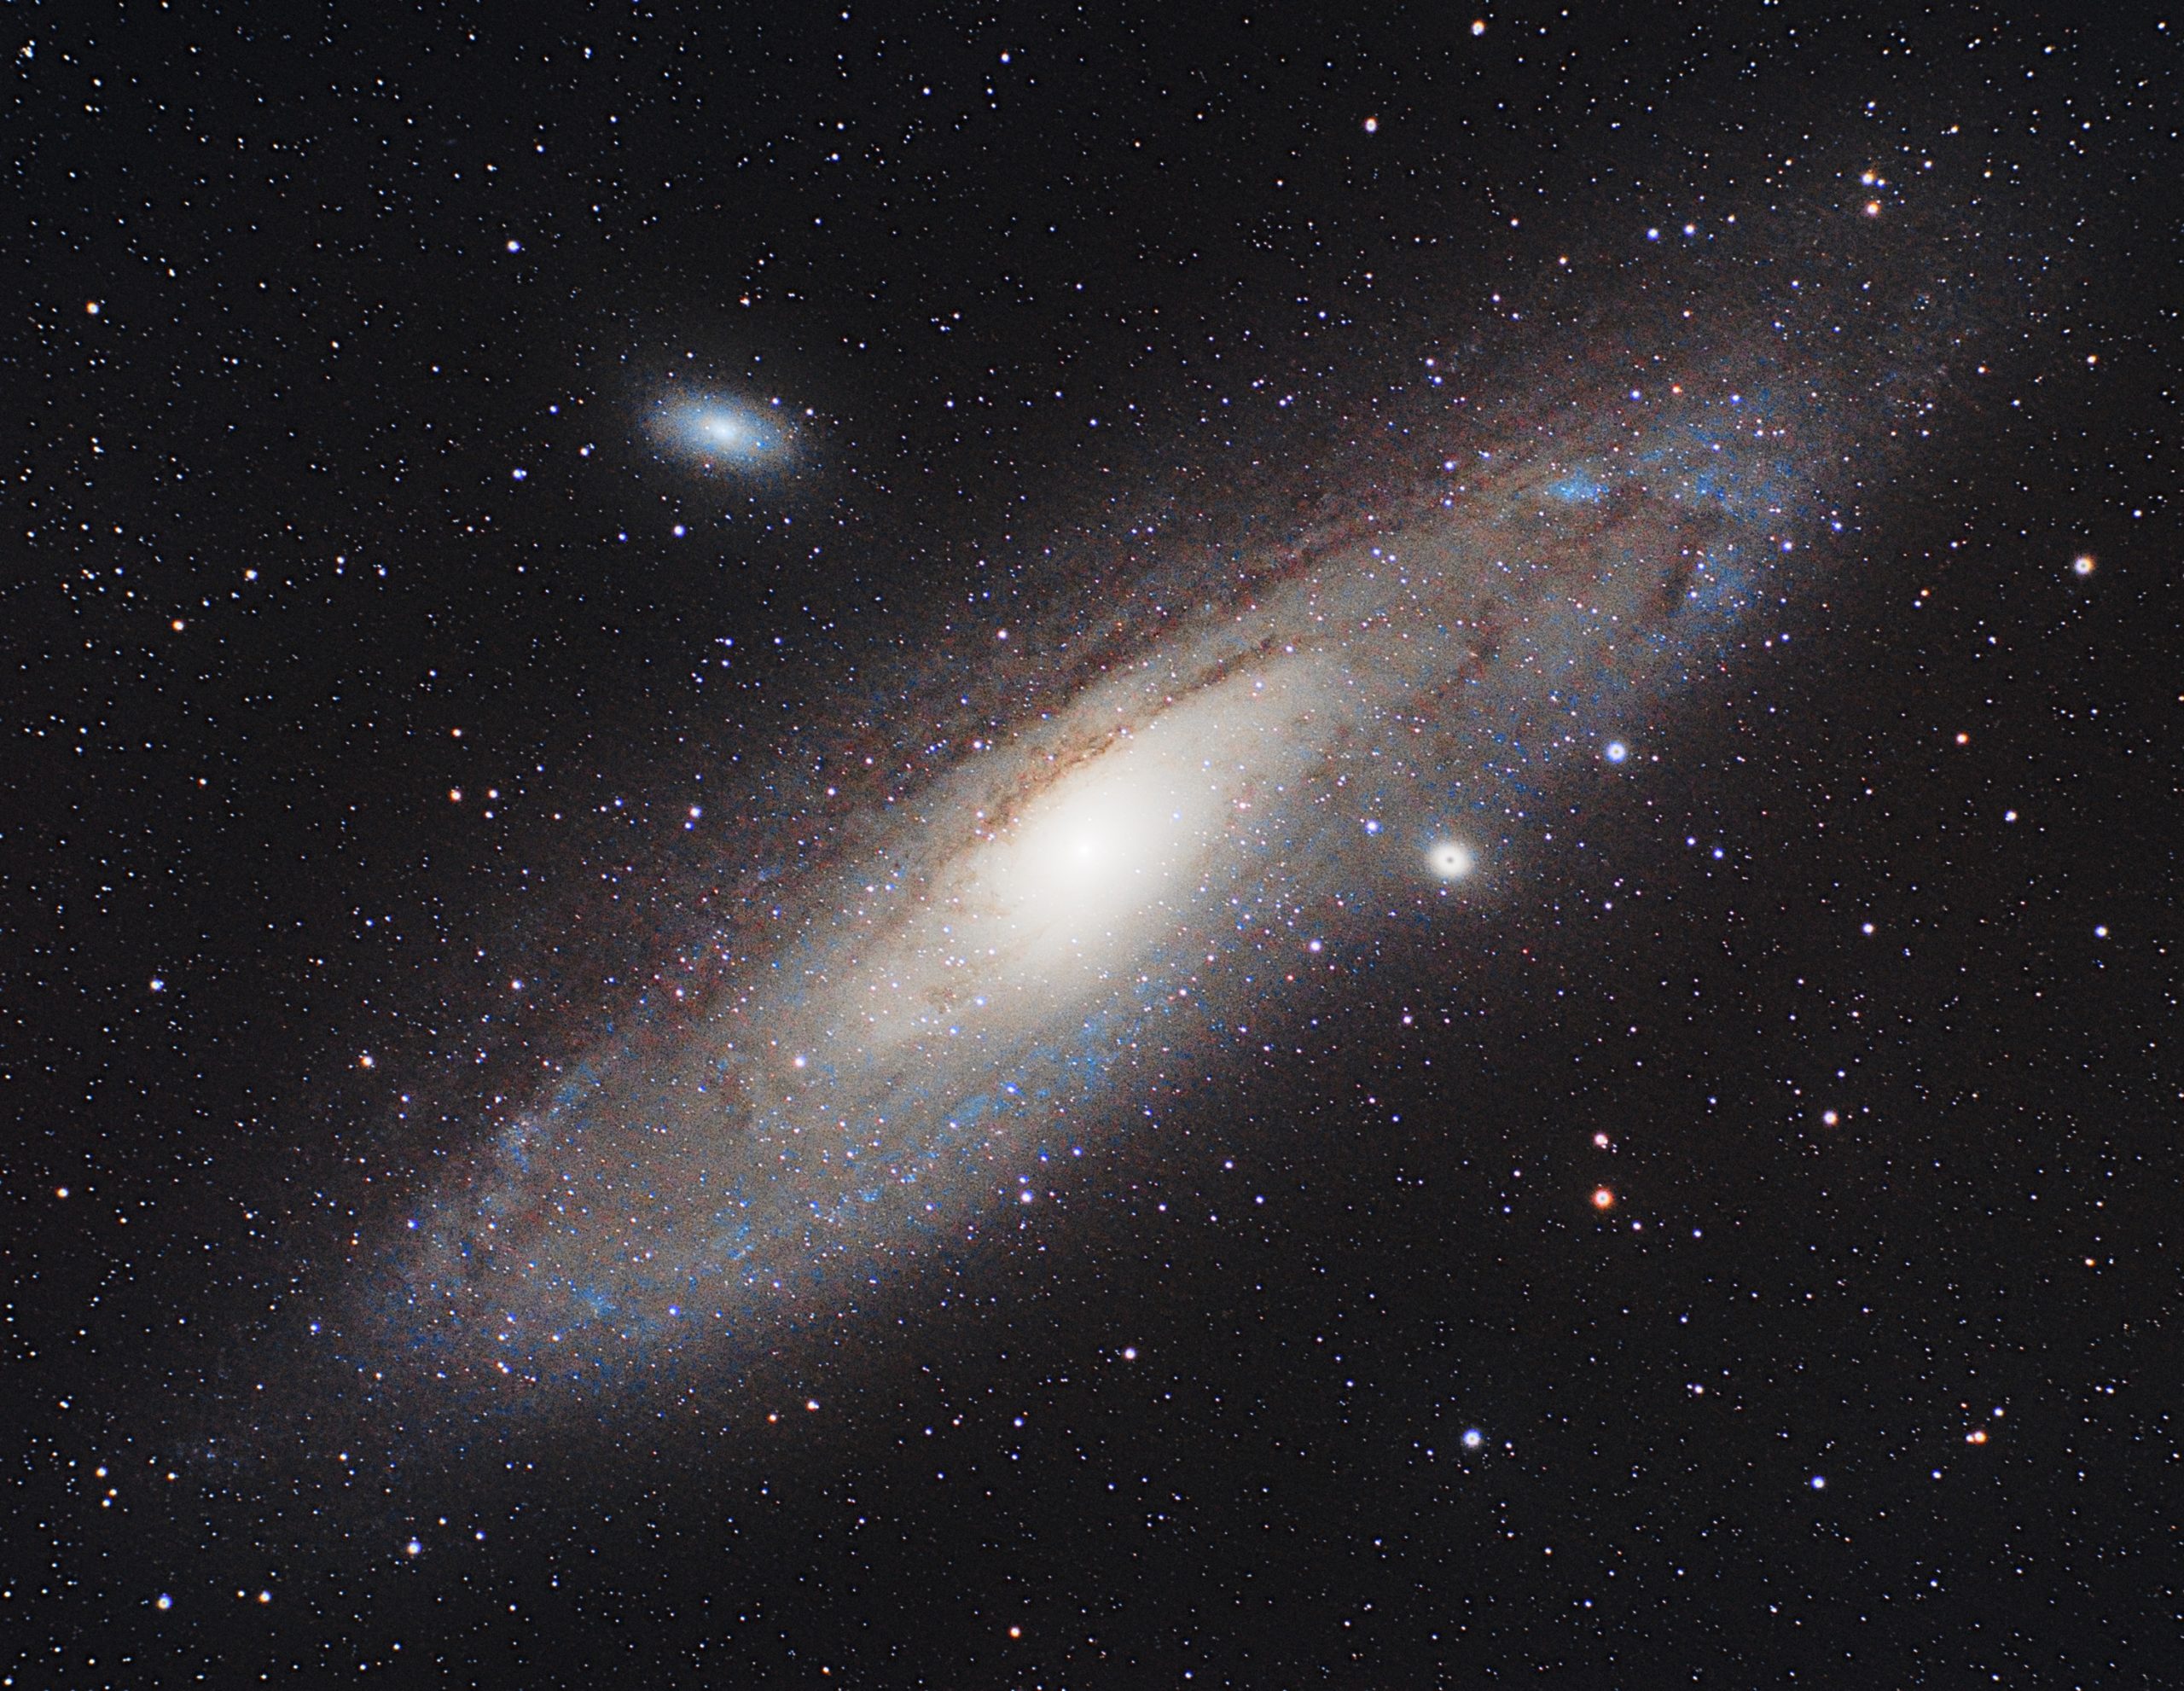 Andromeda Galaxy (M31) captured by an astrophotographer